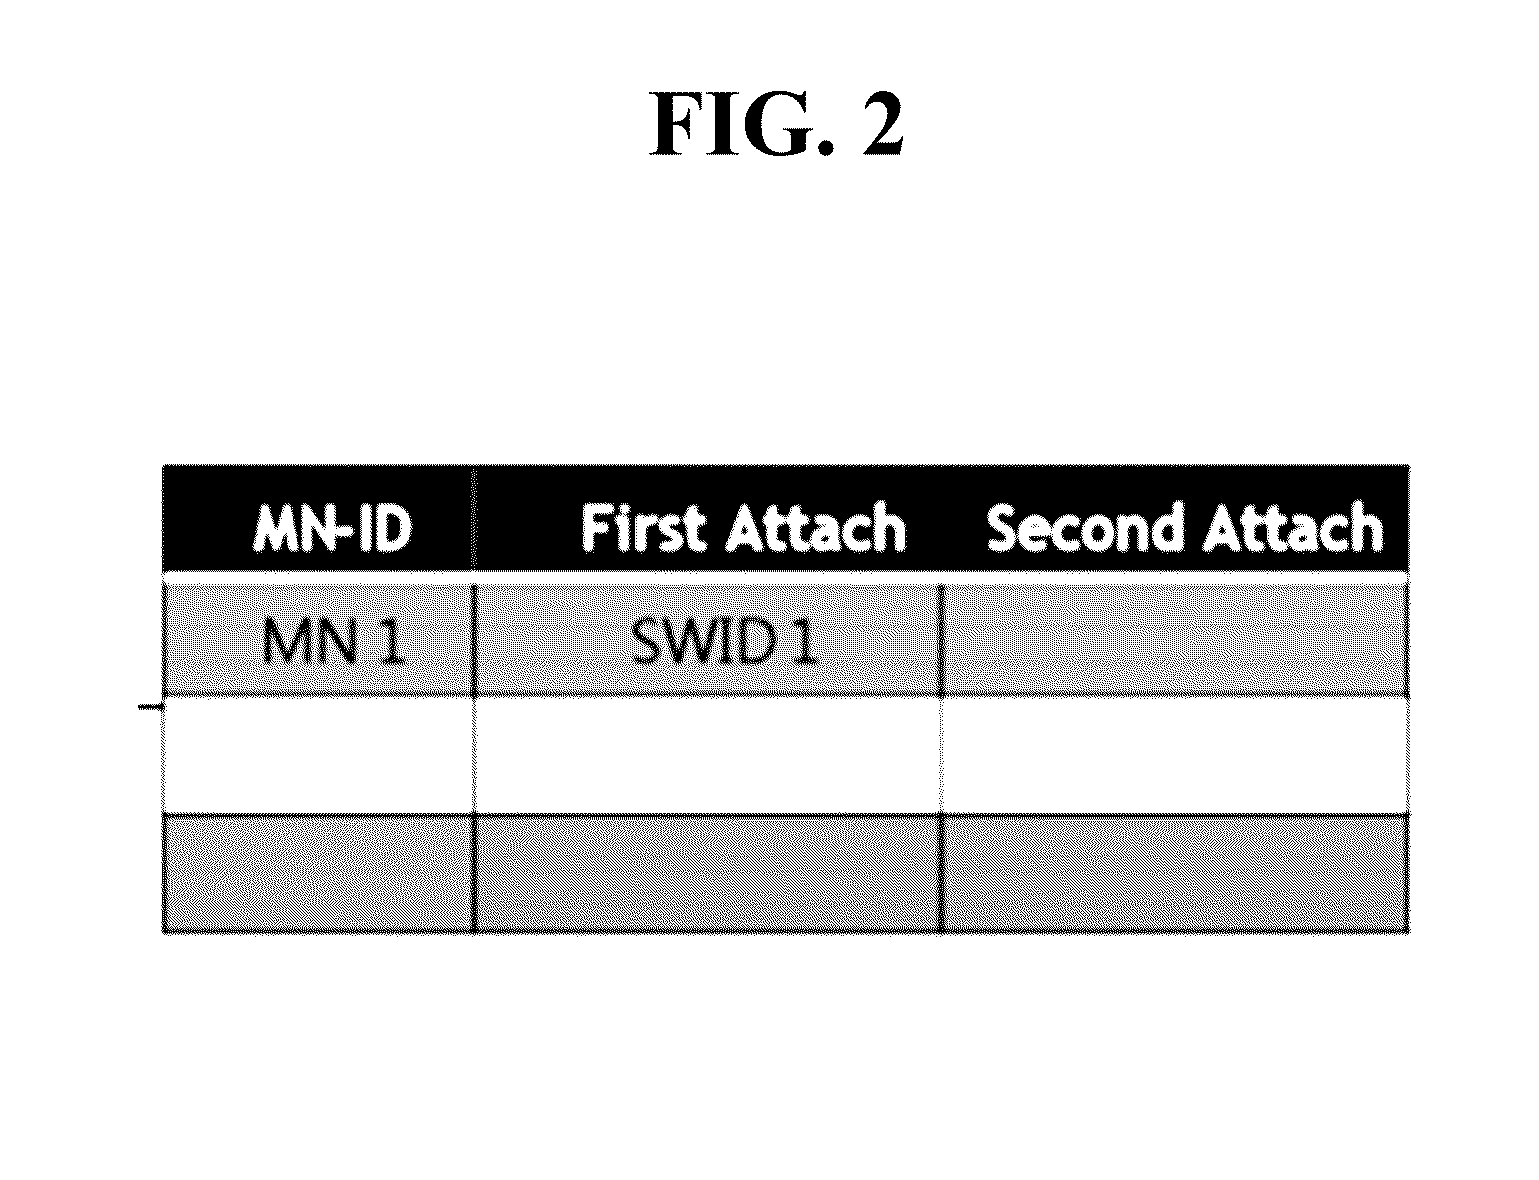 Method and device for supporting mobility of mobile terminal in distributed mobile network based on a software-defined network